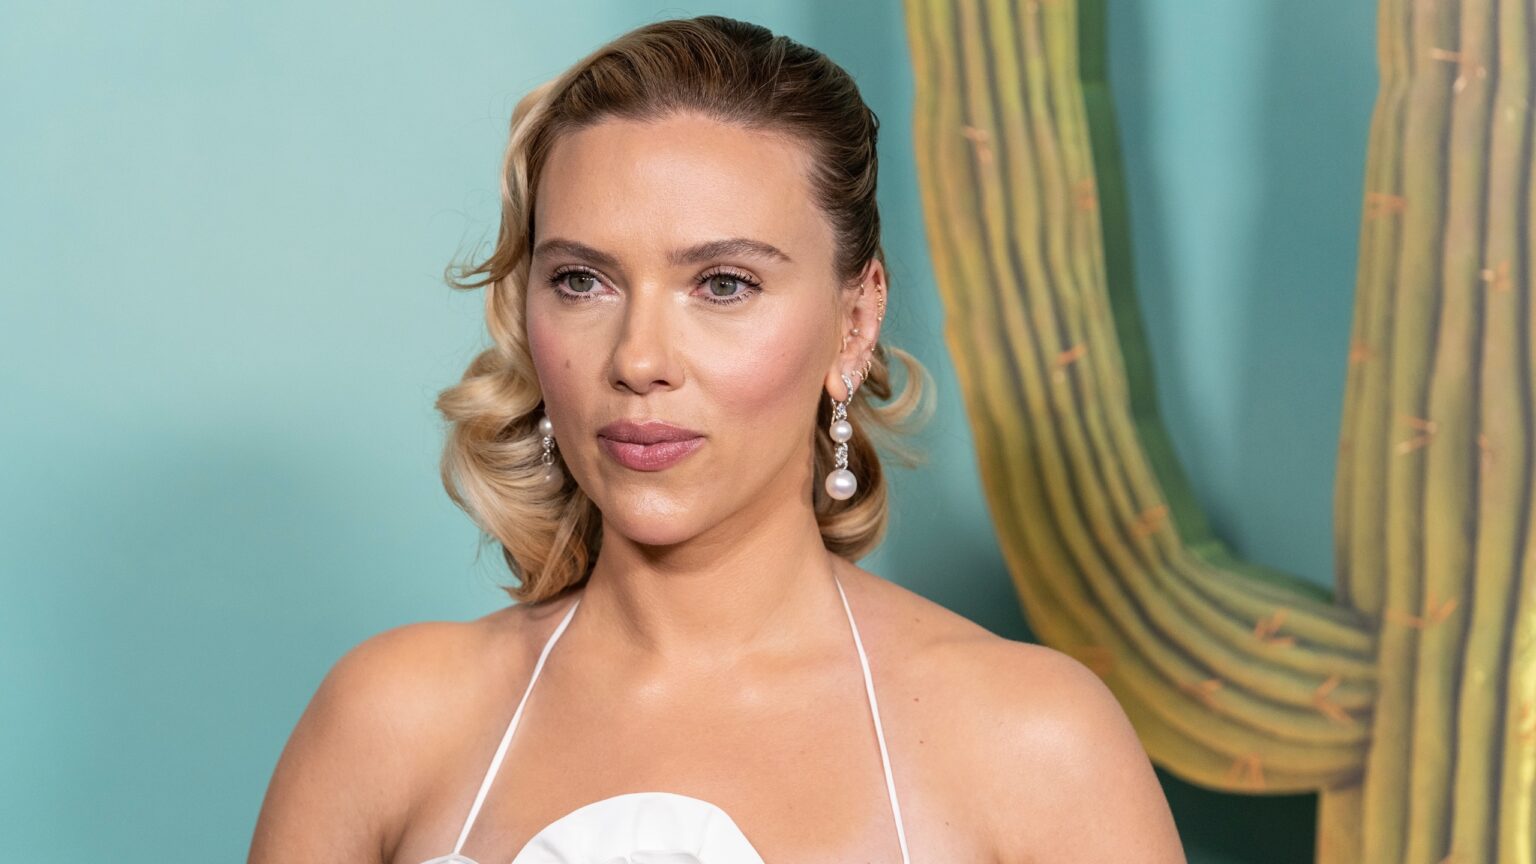 Scarlett Johansson takes legal action against AI app that used her image, People